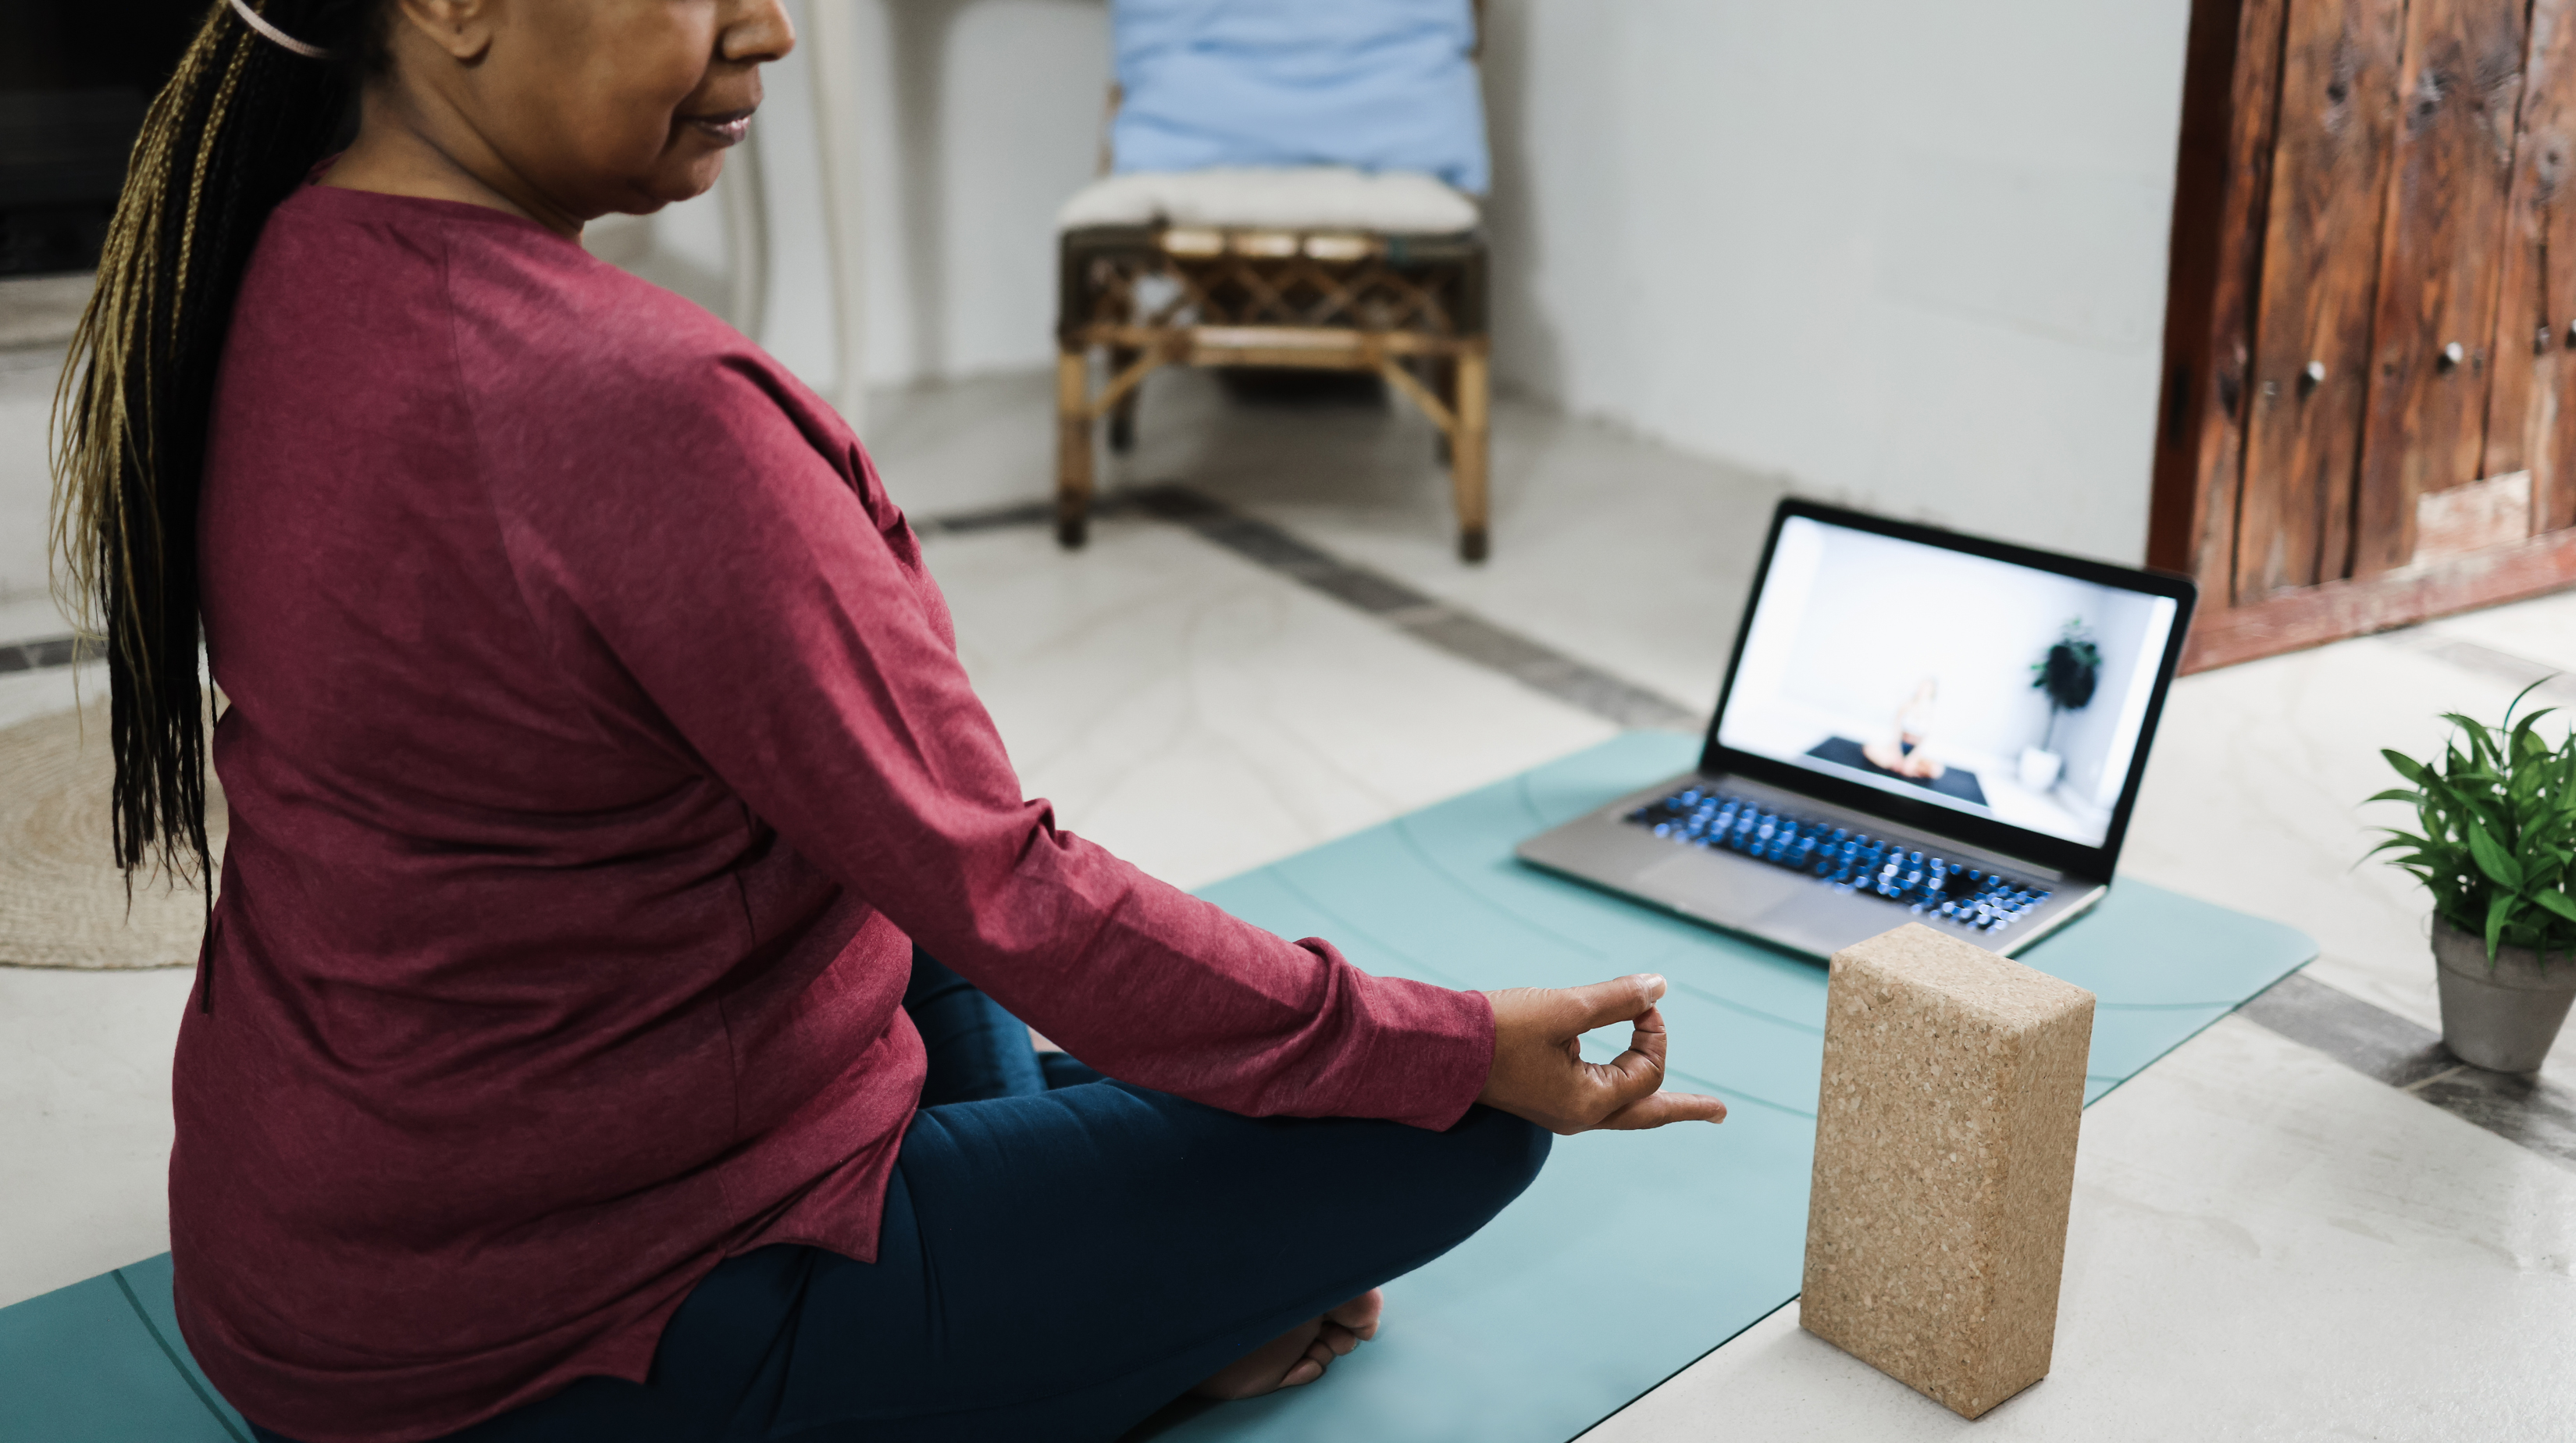 A woman doing yoga infront of TV